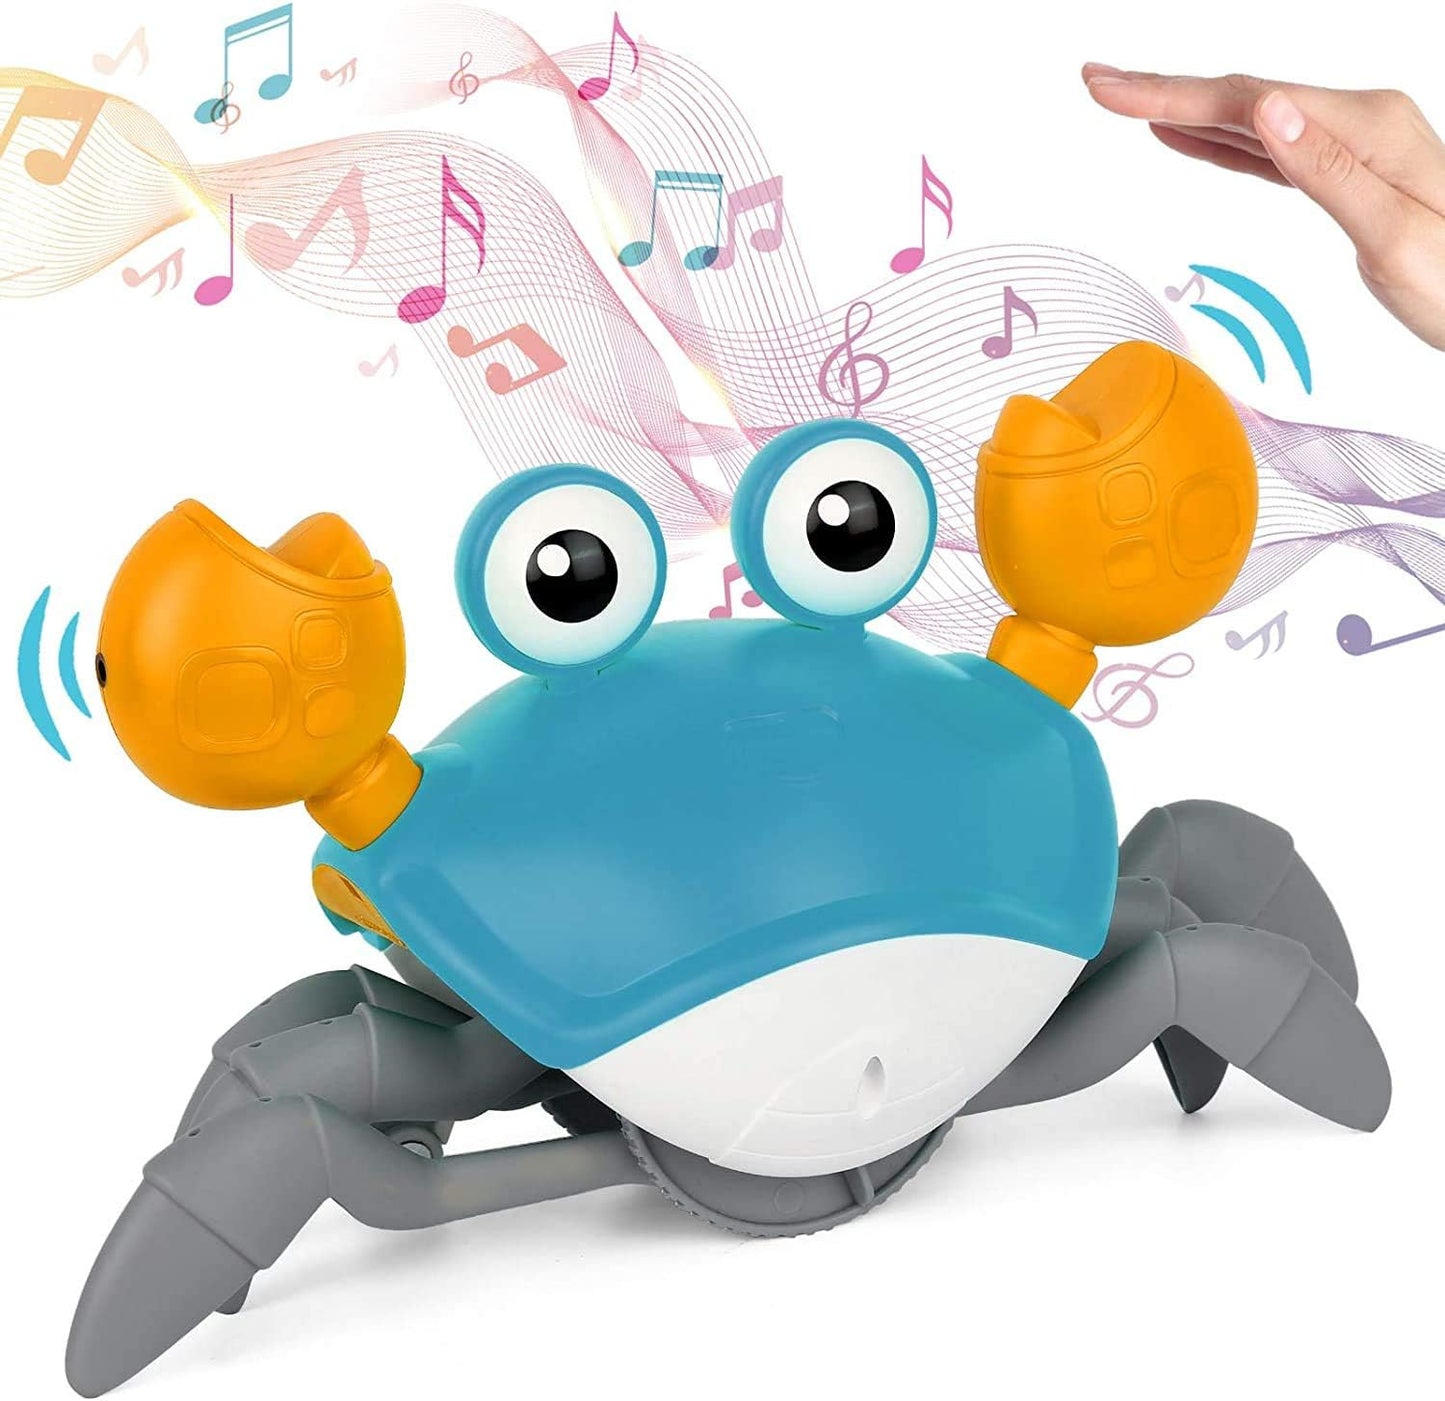 Interactive Crawling Crab Baby Toy - Electronic Light-Up with Music, Perfect for Boys and Girls Learning (Blue)